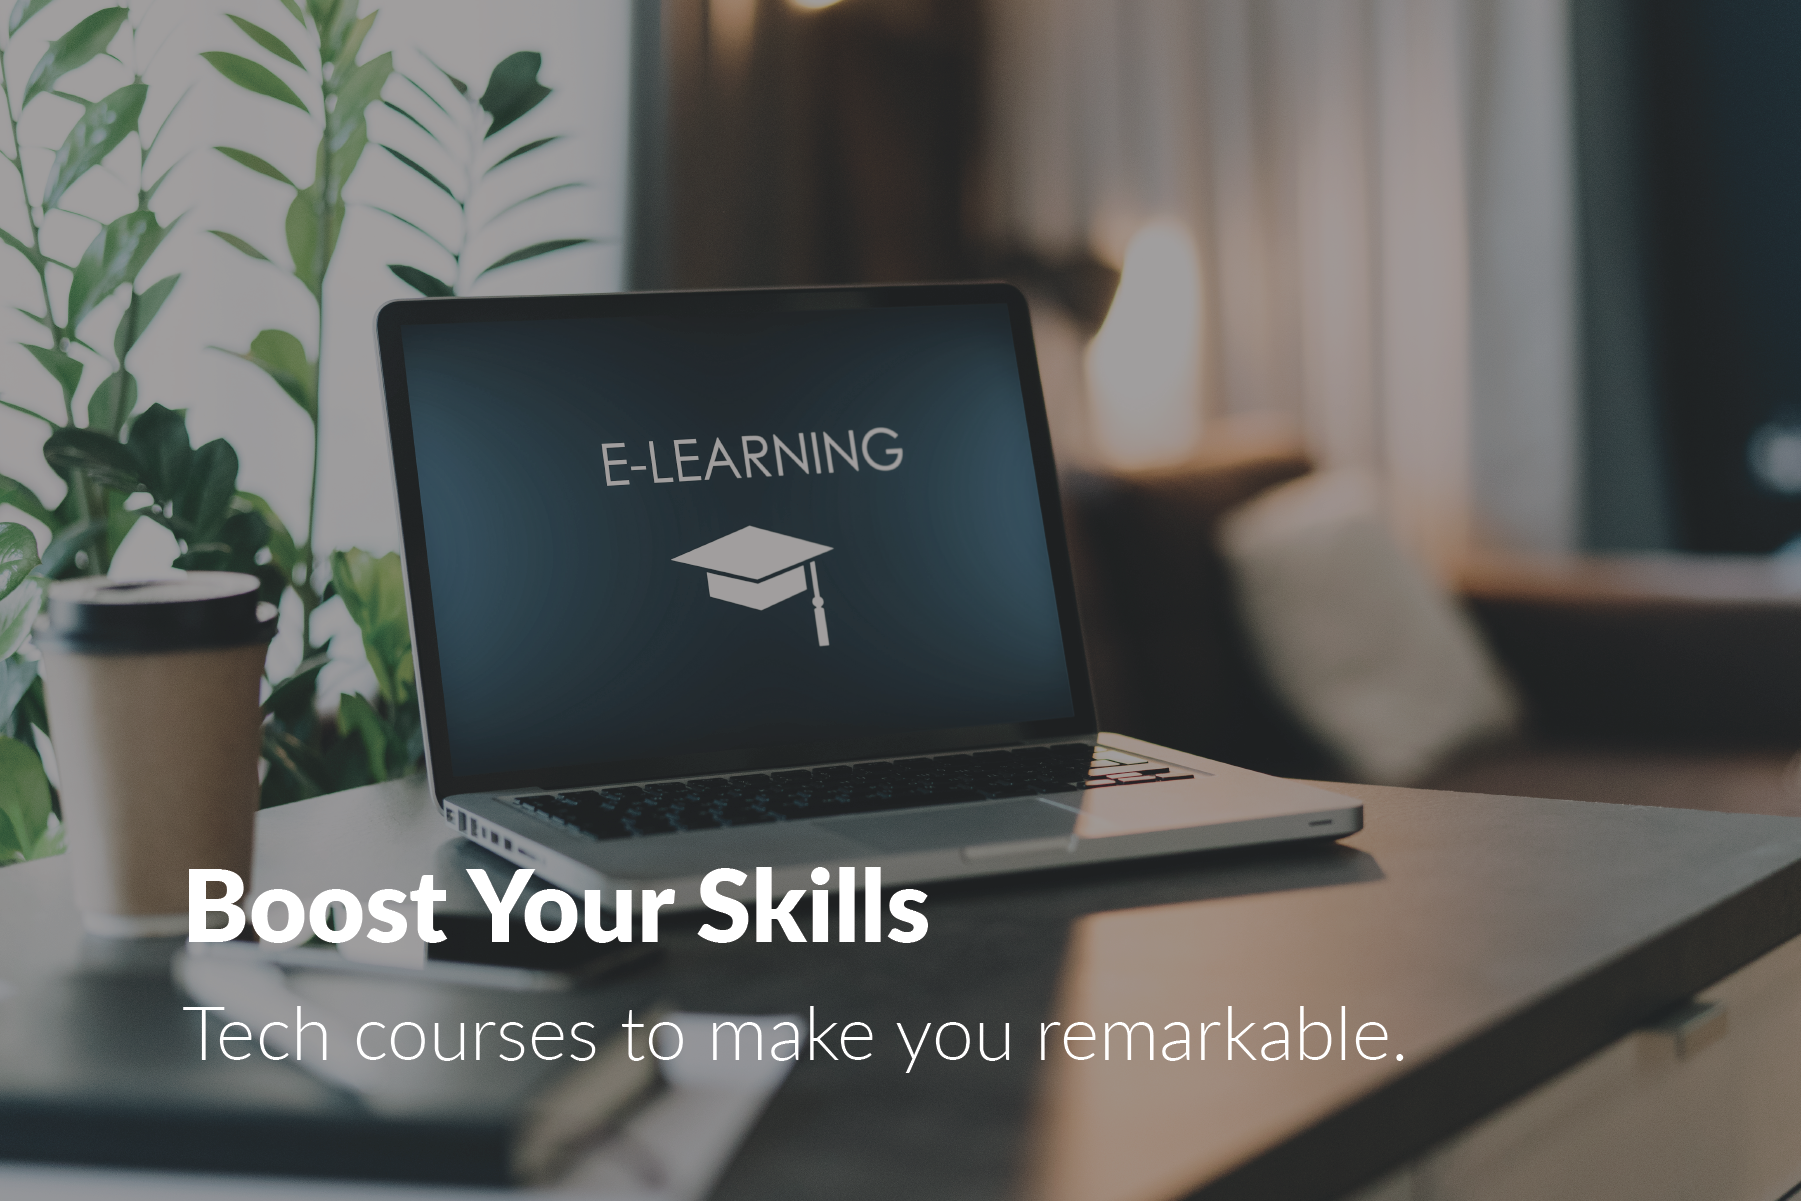 Boost your skills. Tech courses to make you remarkable.